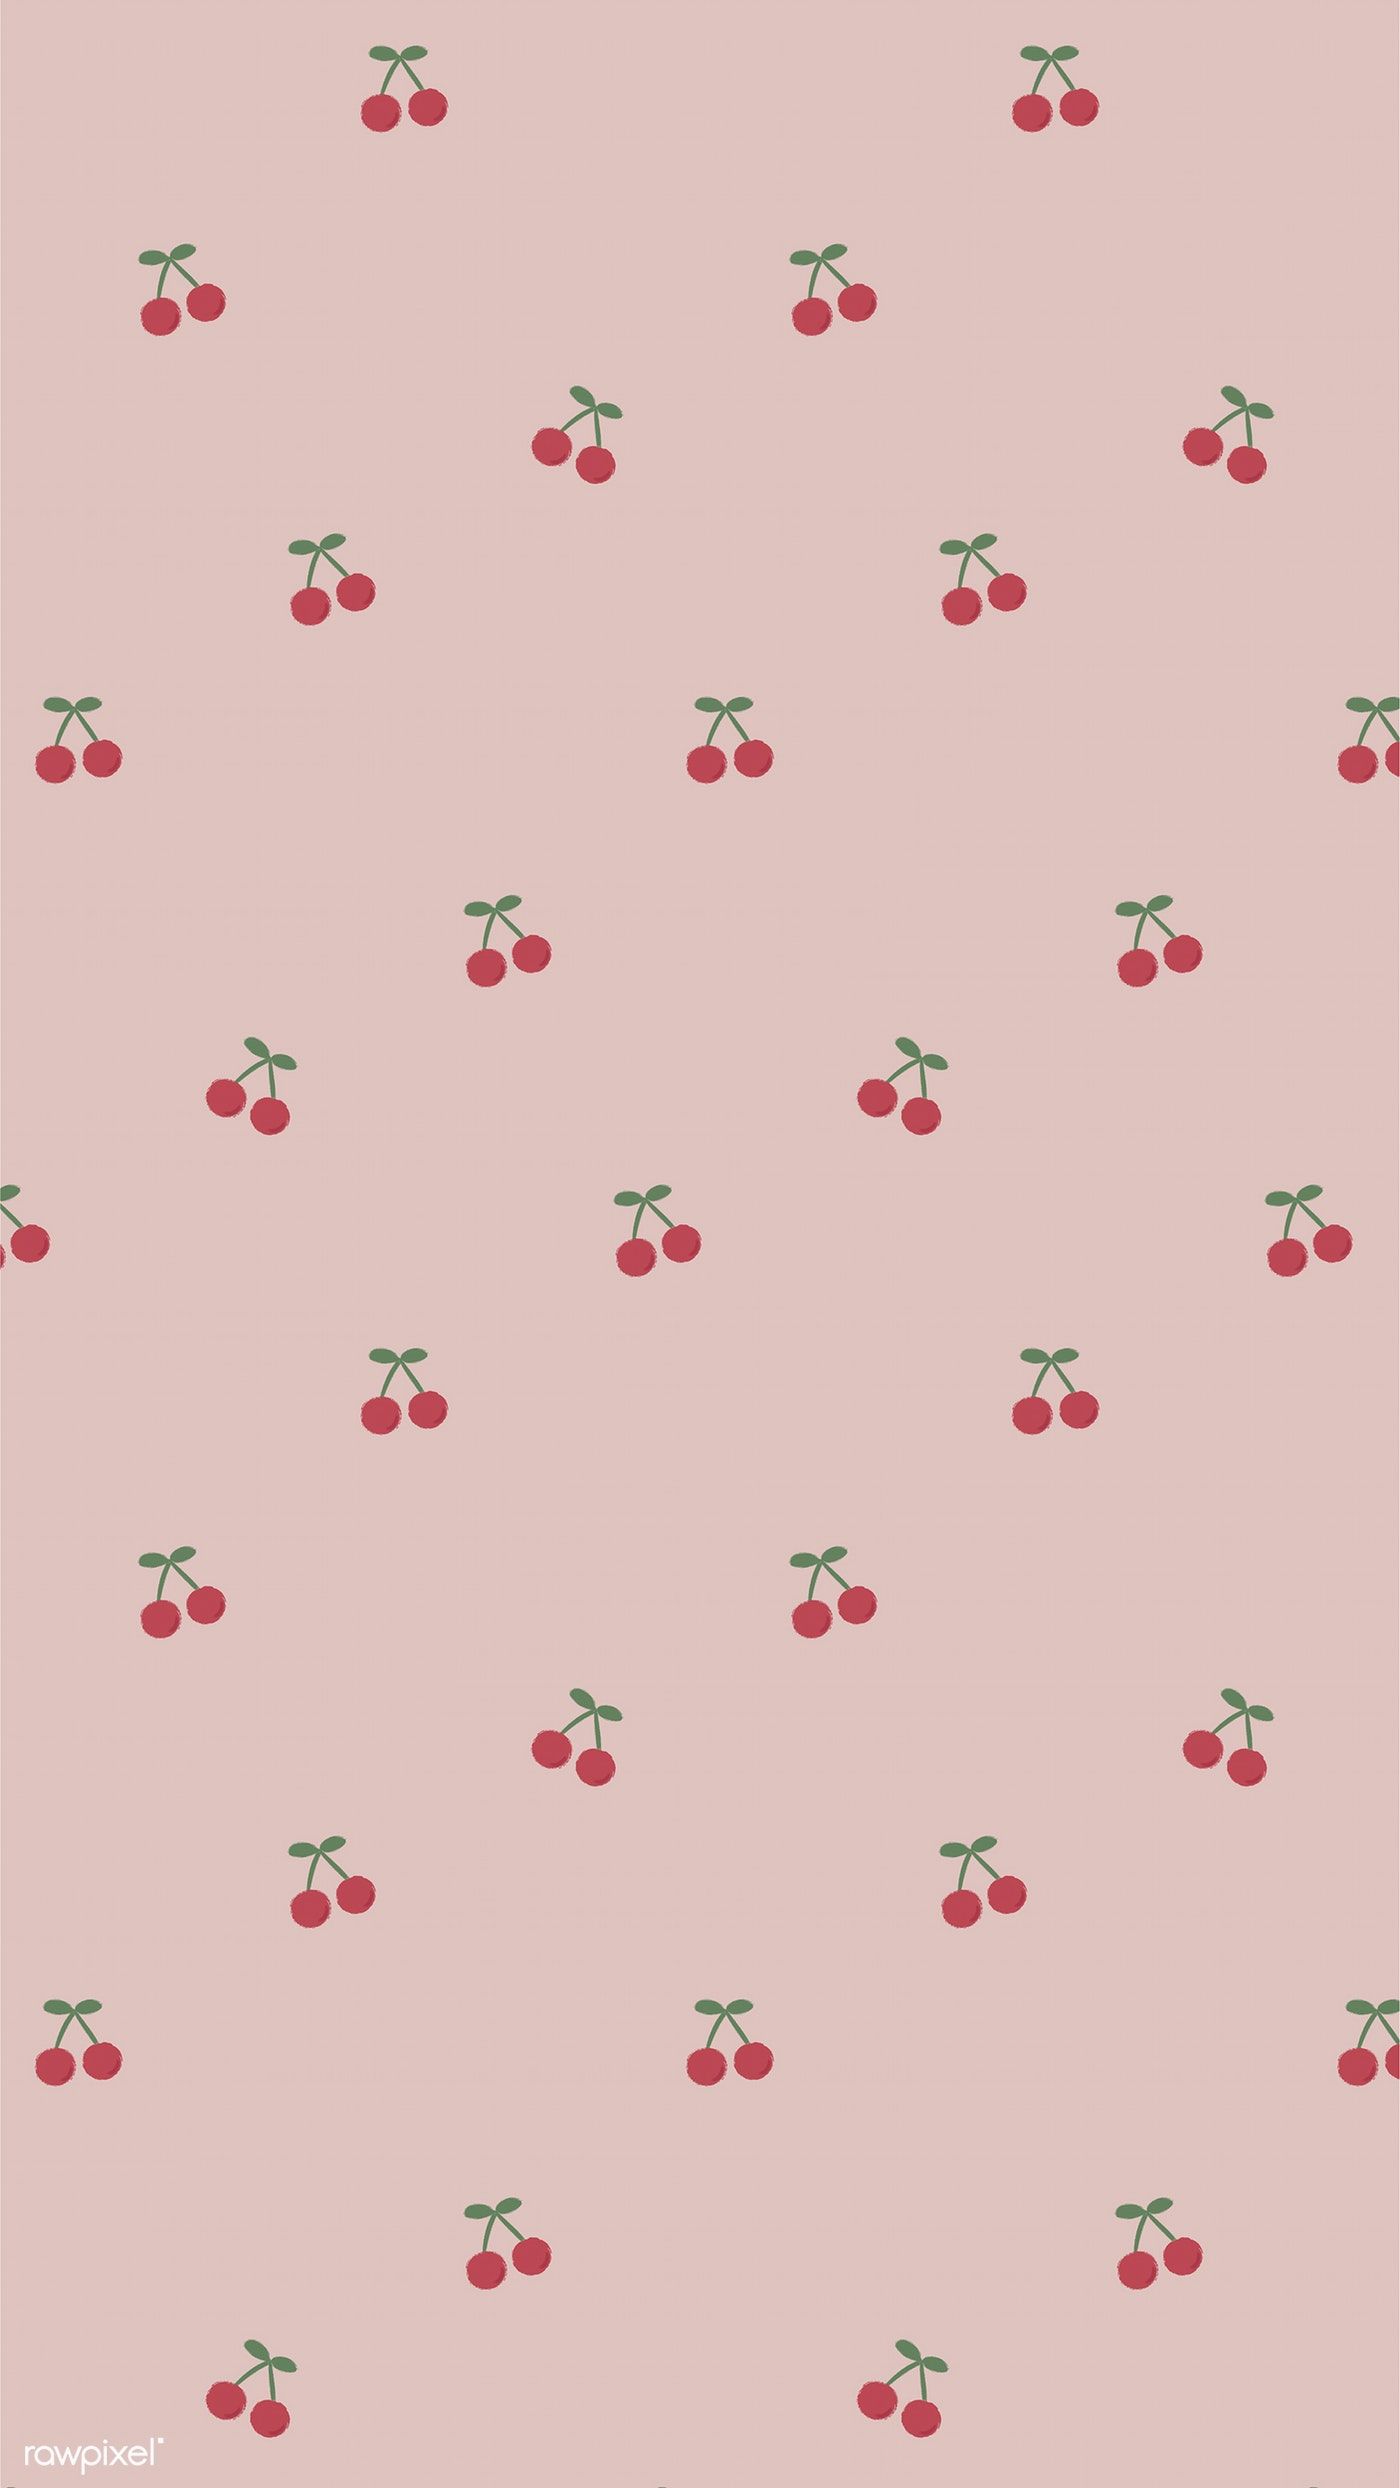 Download premium image of Red hand drawn cherry pattern on pink mobile phone wallpaper illustration by marinemynt about iphone wallpaper, cherry iphone wallpaper, pink mobile wallpaper, floral phone background, and pattern 2035428